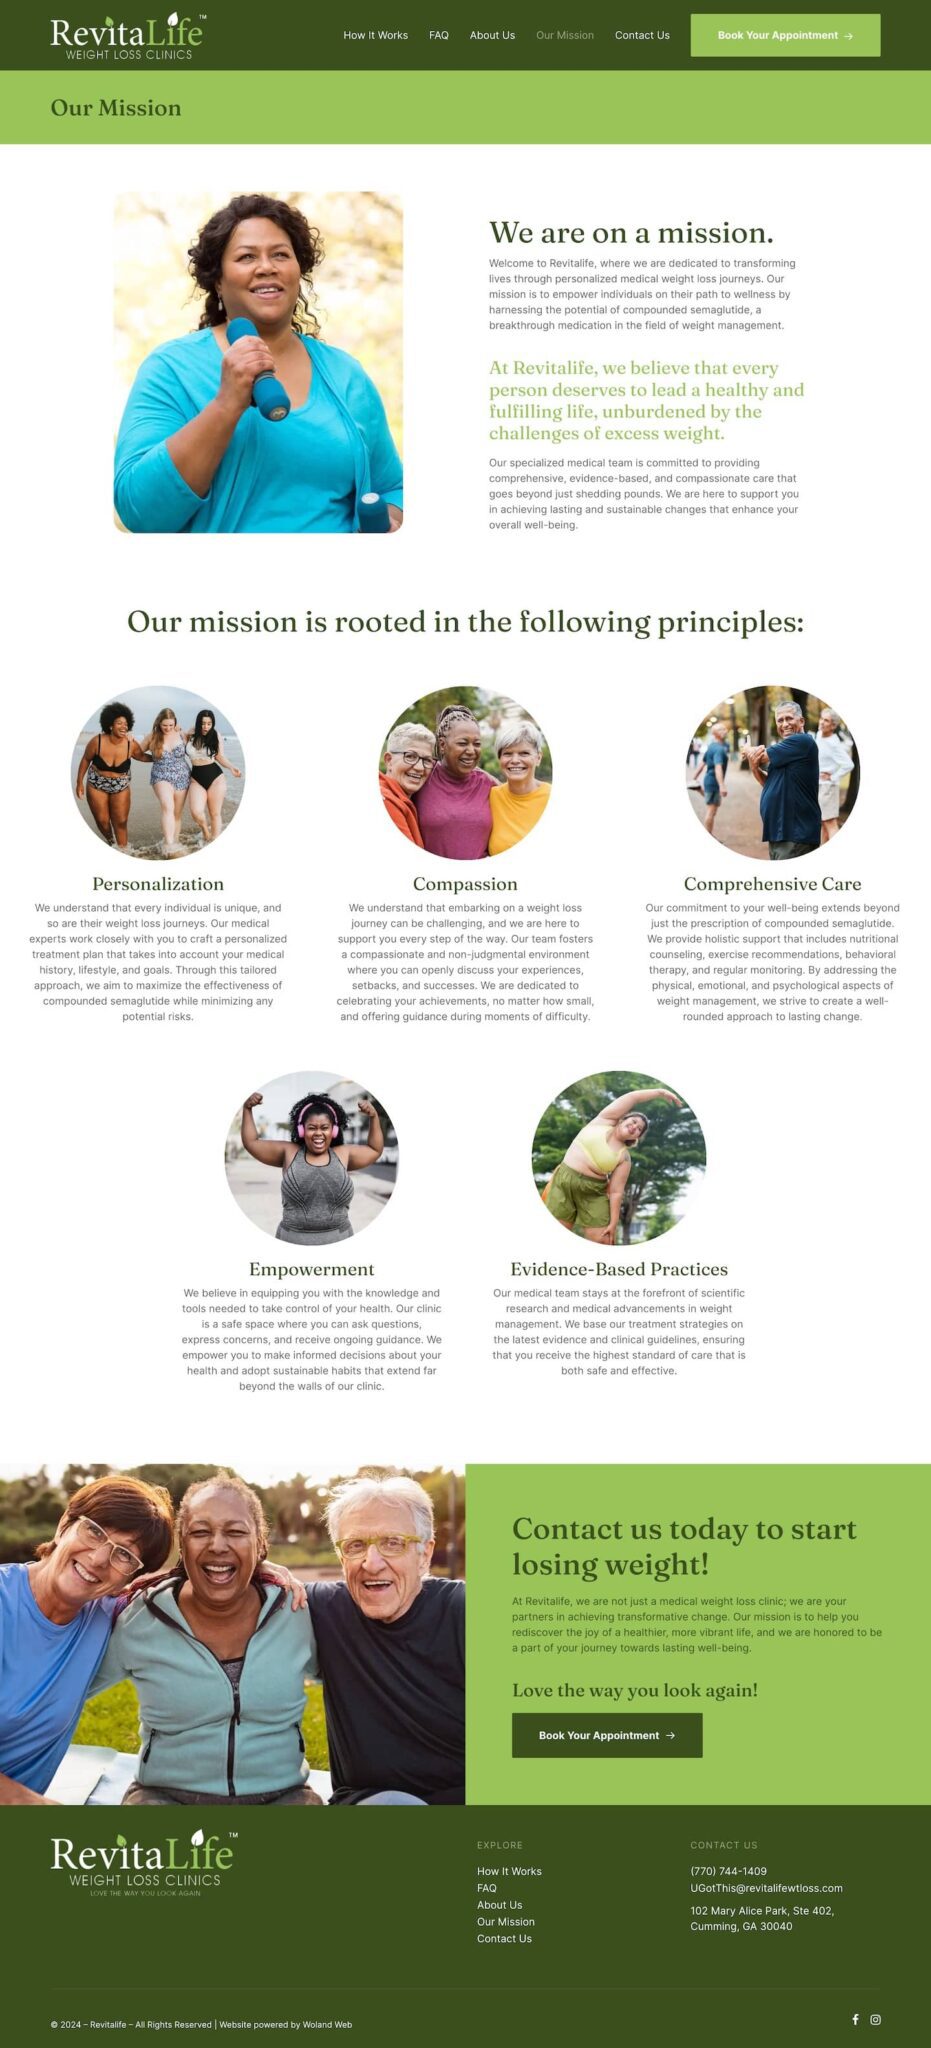 Revitalife website-screenshot of Our Mission page